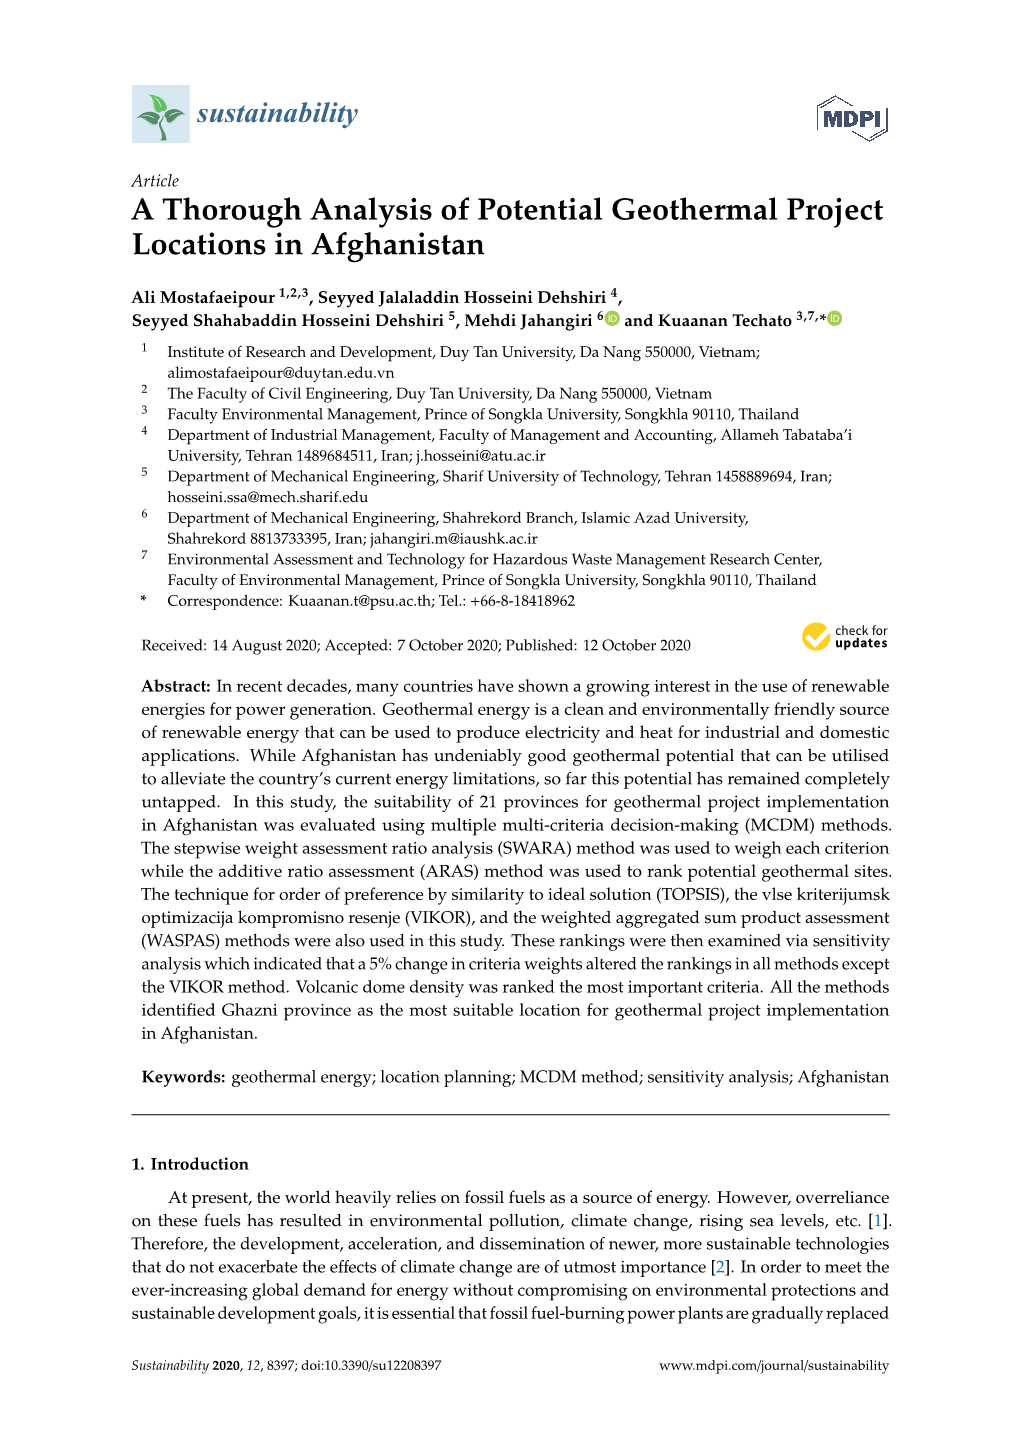 A Thorough Analysis of Potential Geothermal Project Locations in Afghanistan